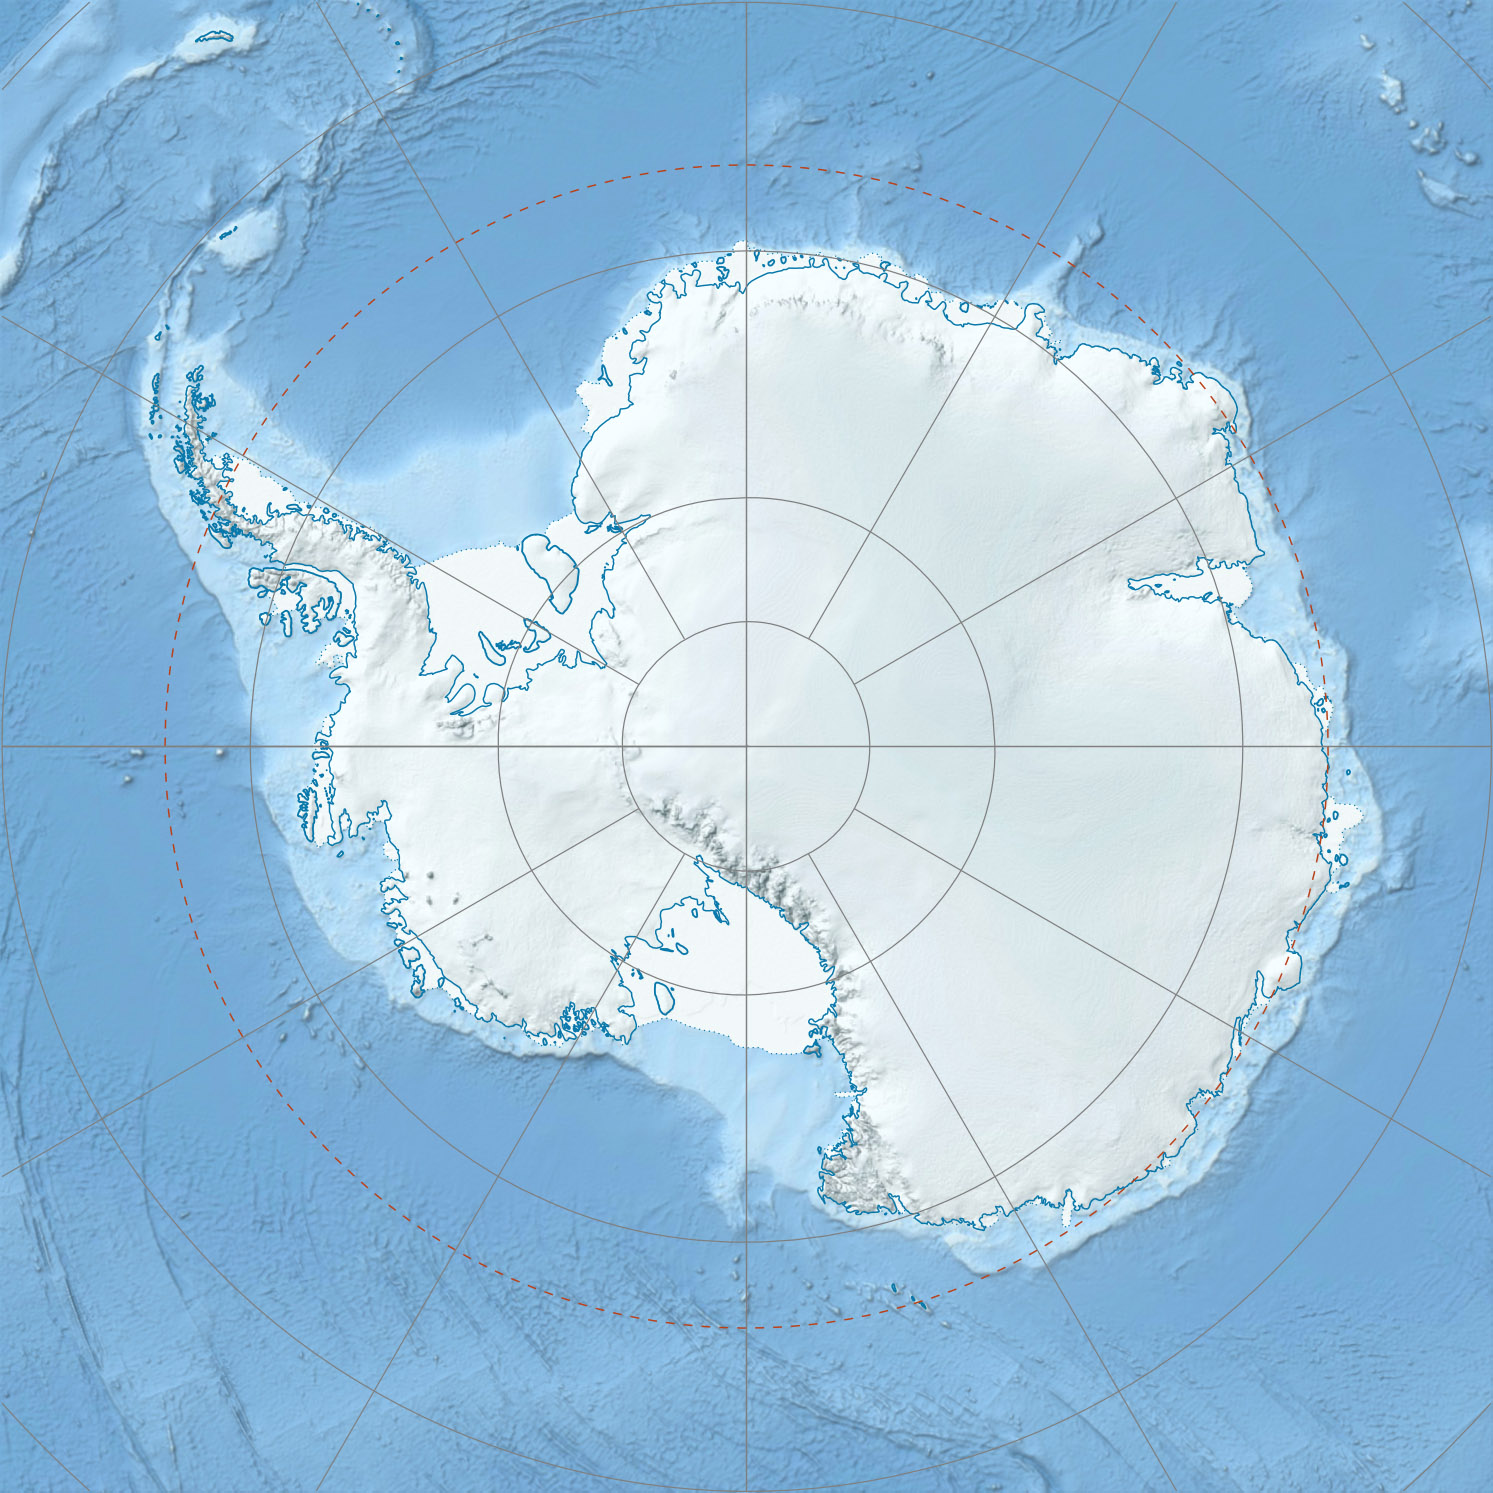 Halley Research Station is located in Antarctica